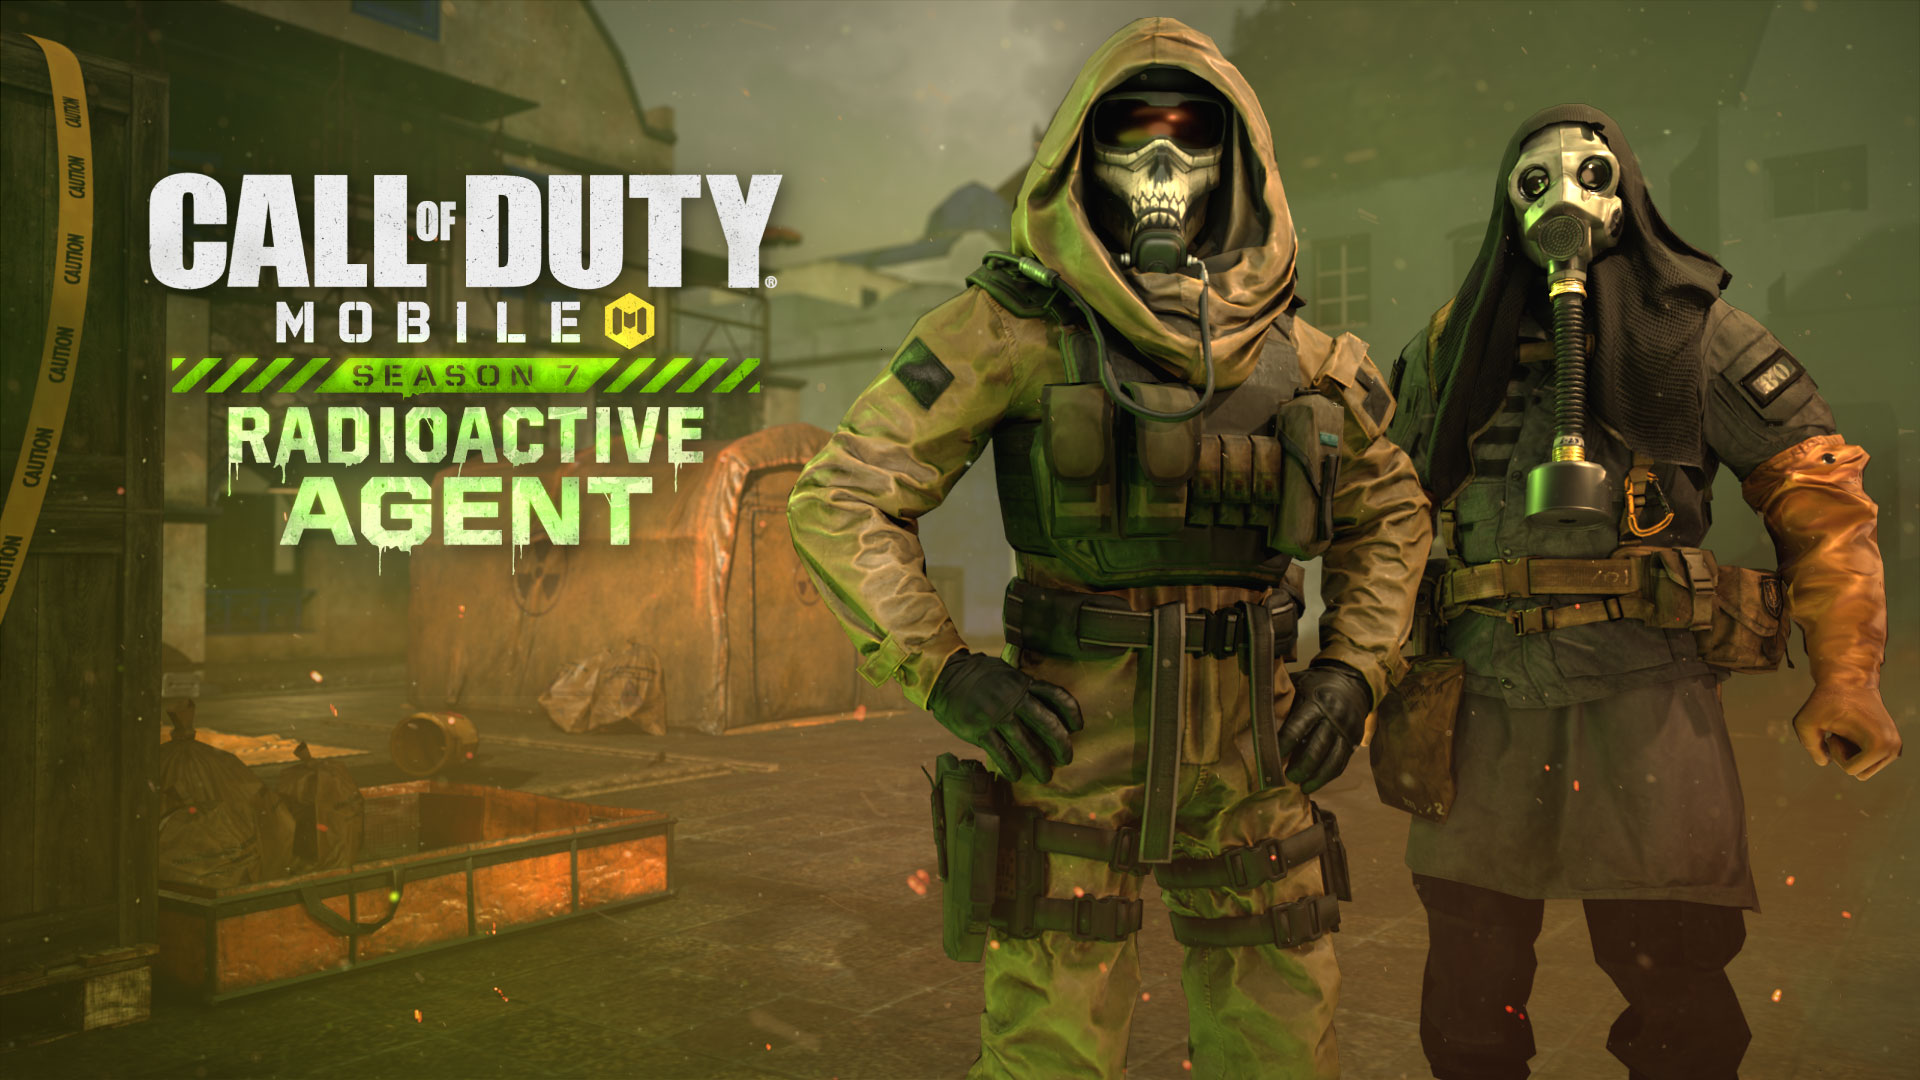 Radioactive Agent, the new Season of Call of Duty®: Mobile, is now live!